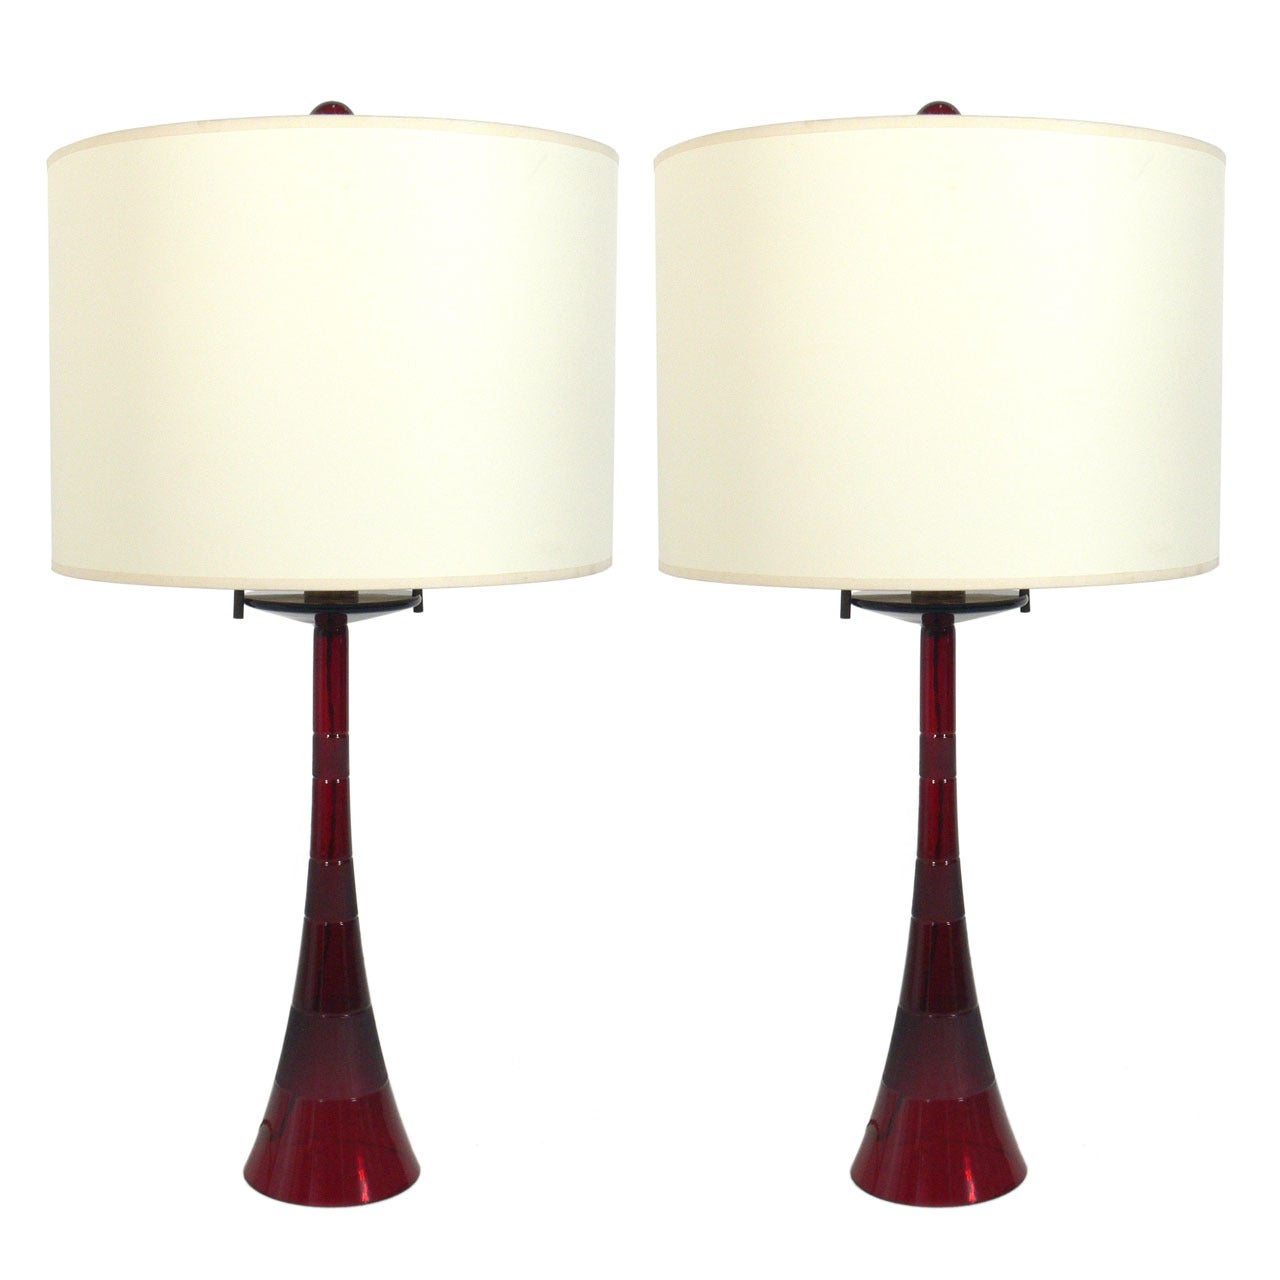 Pair of Deep Red Murano Glass Lamps by John Hutton for Donghia